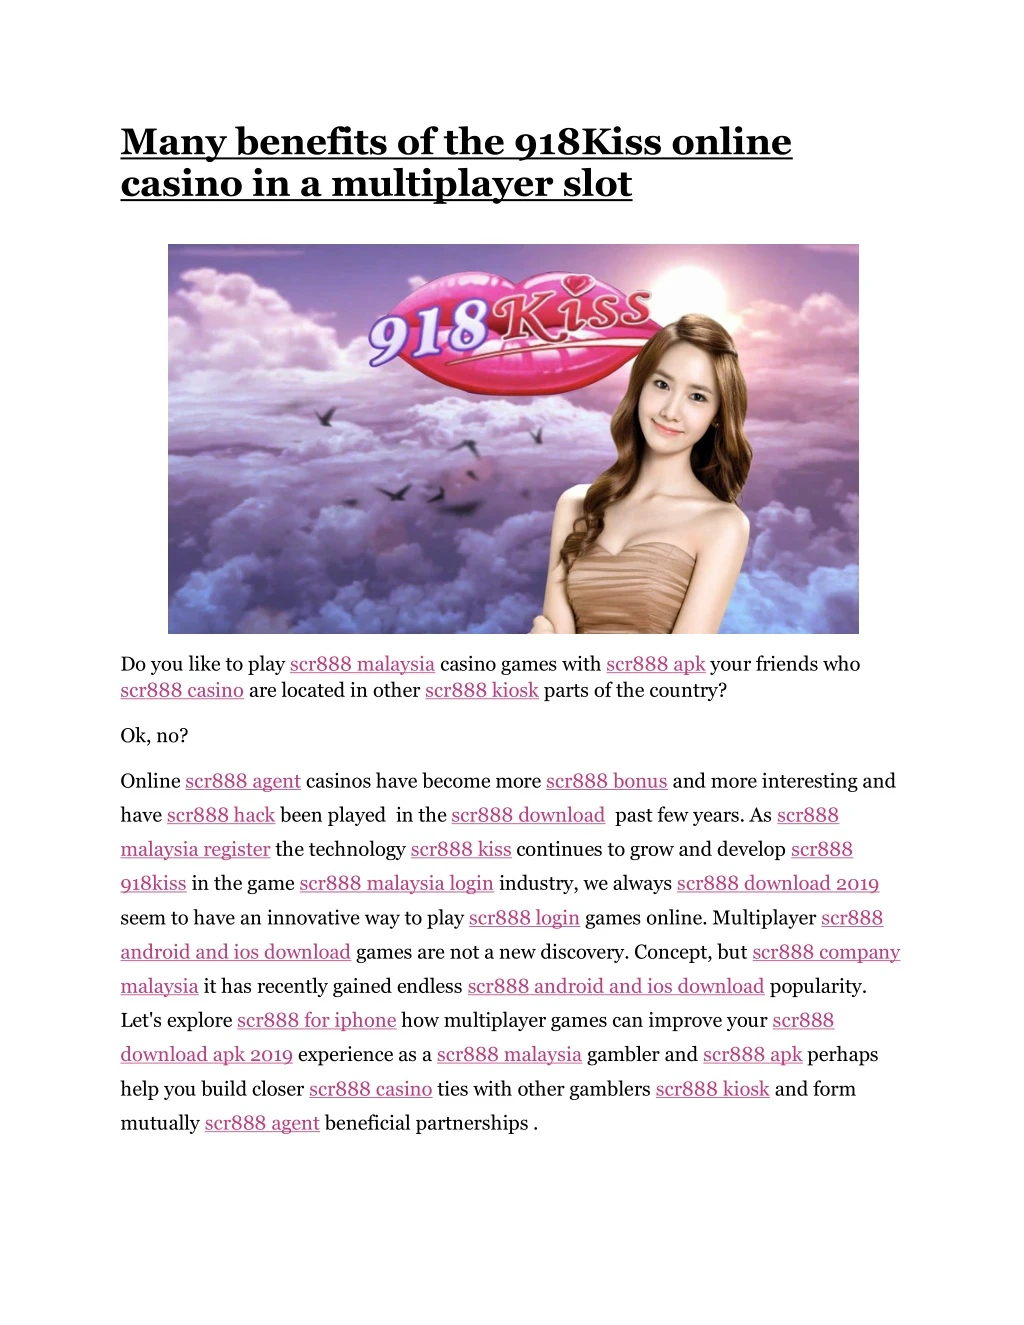 many benefits of the 918kiss online casino